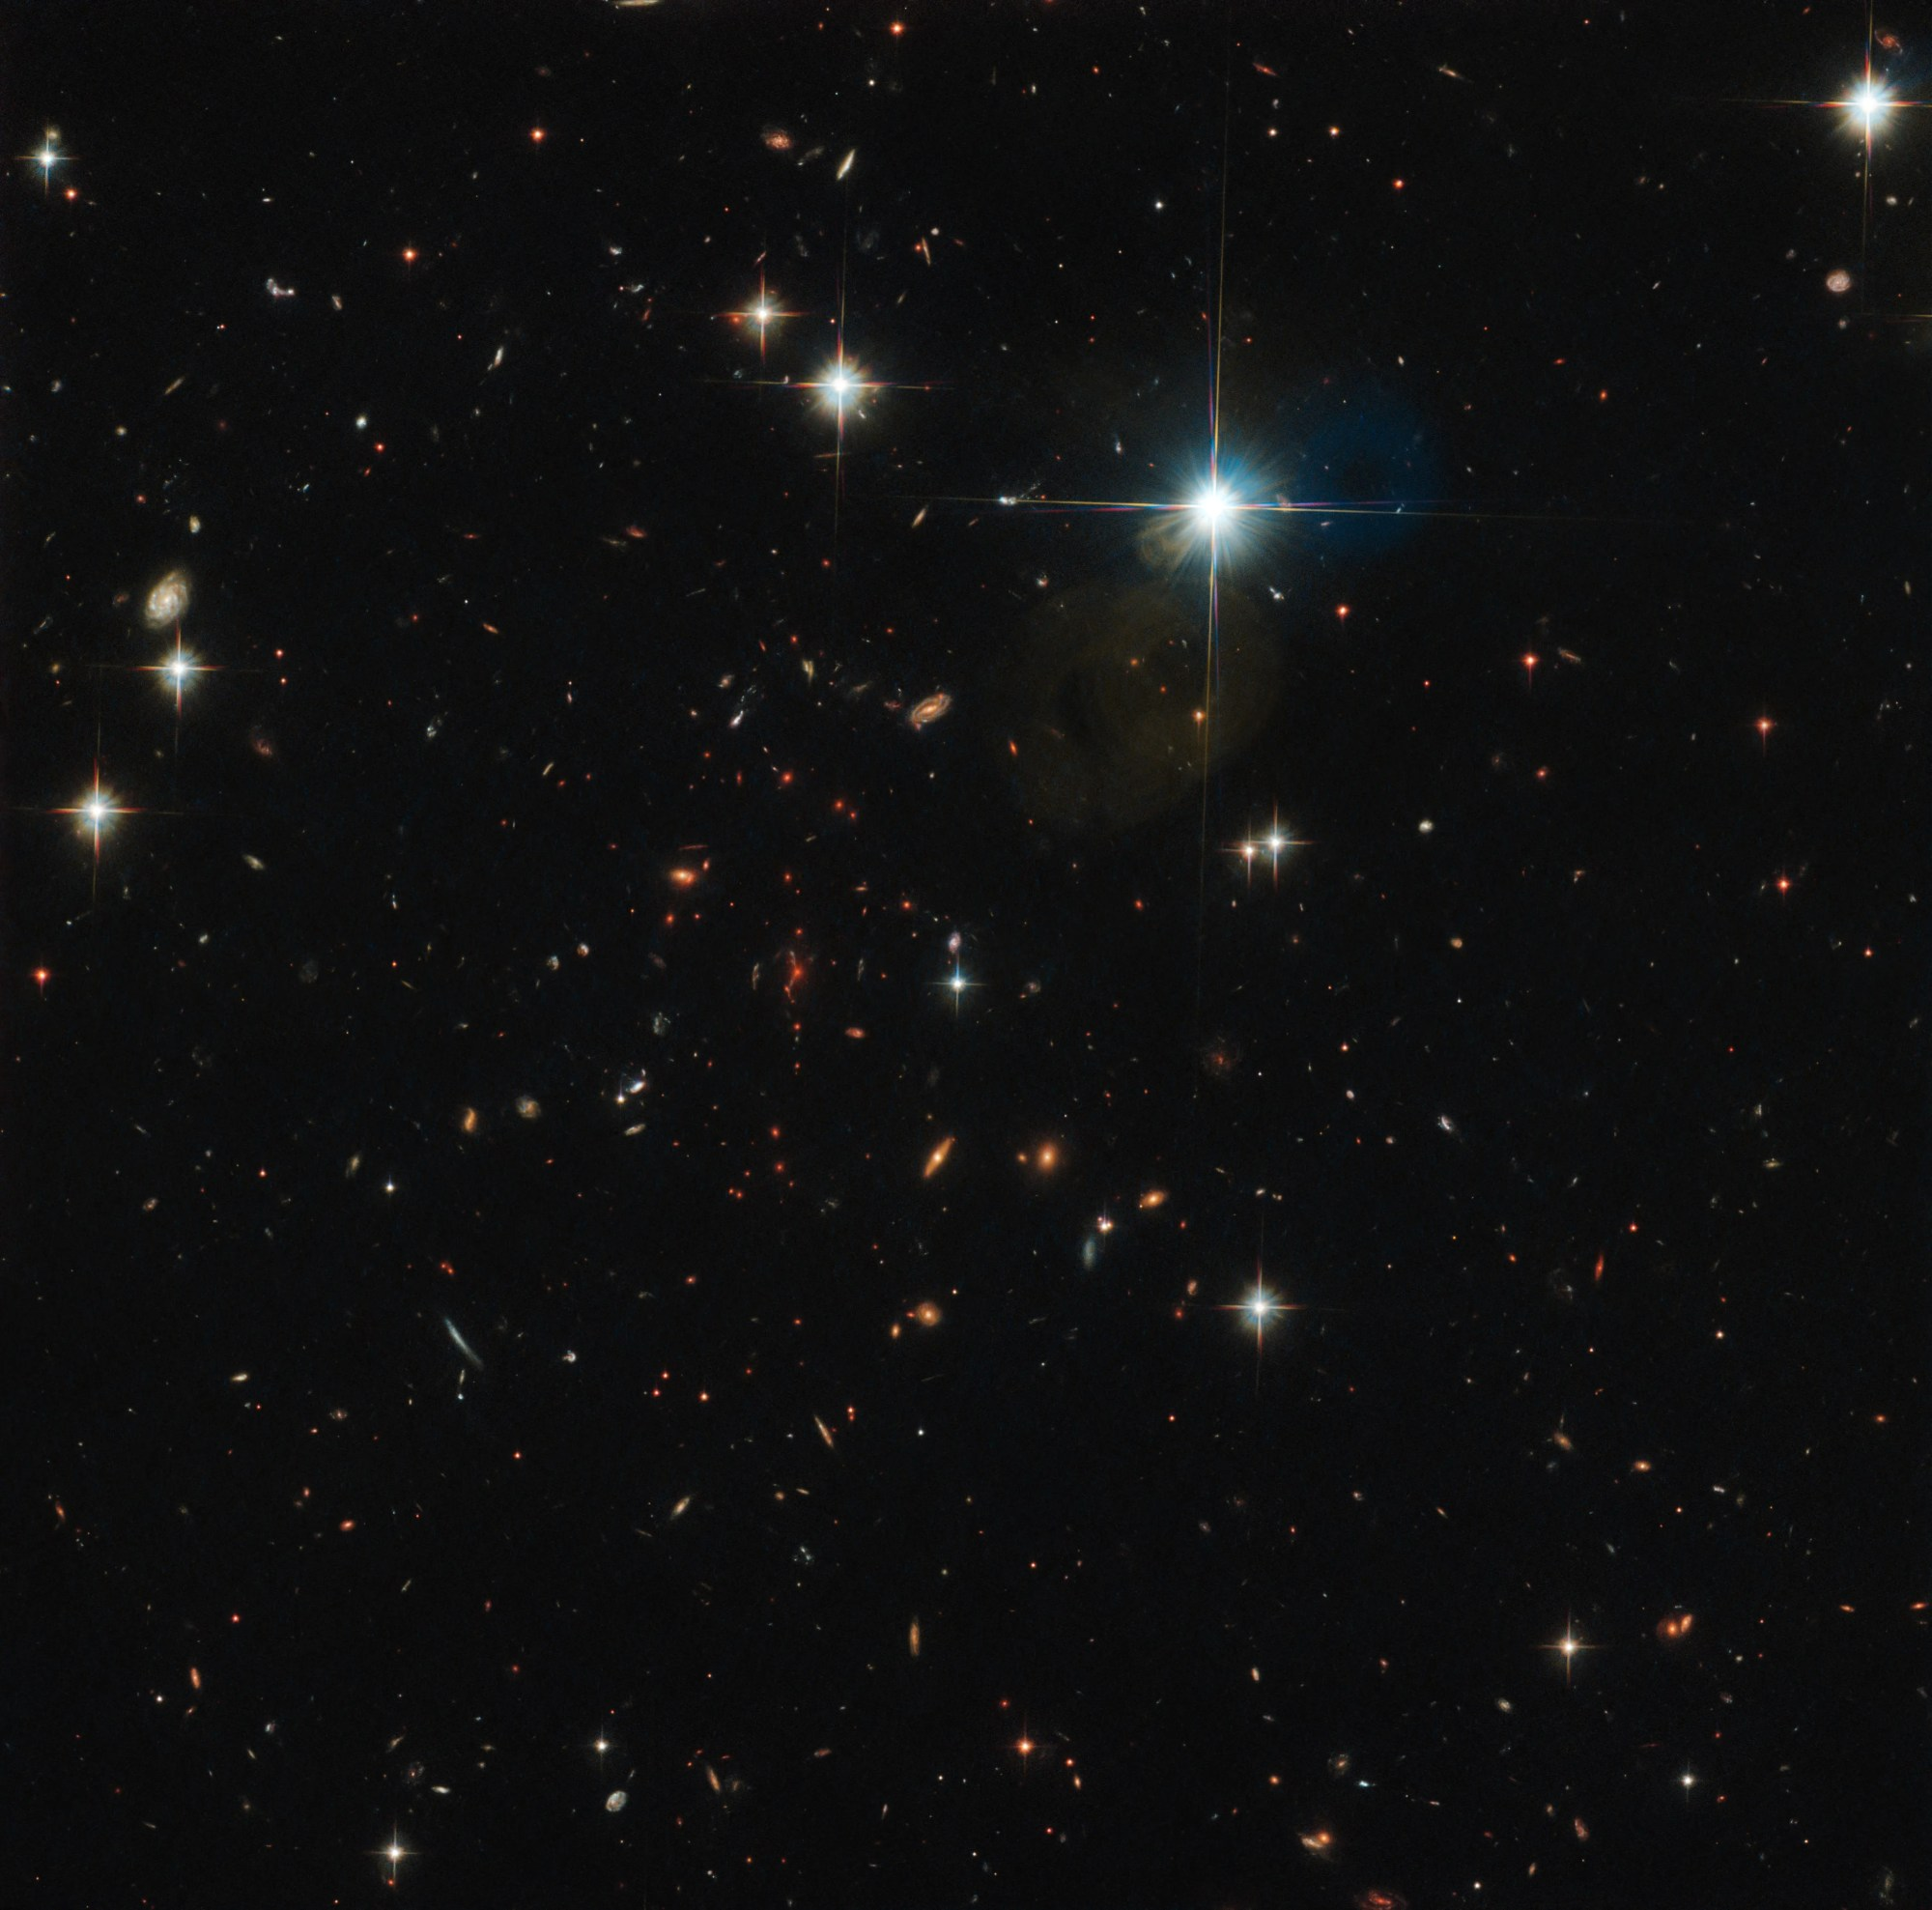 Spt0615 galaxy cluster, as seen by hubble